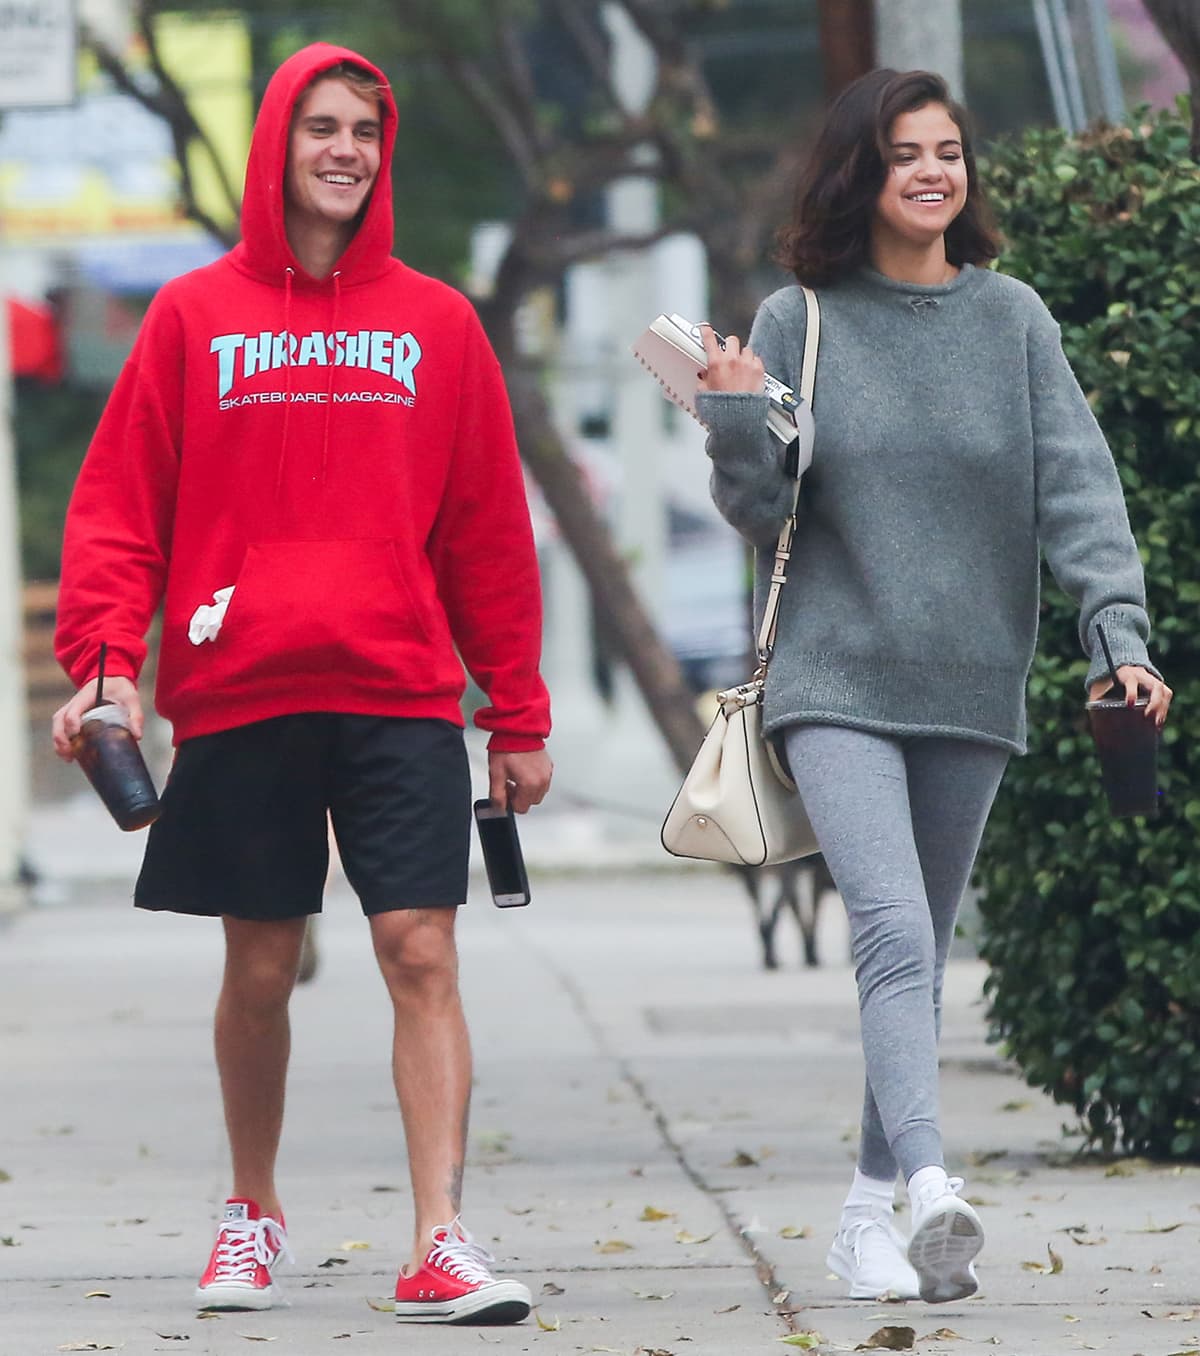 Justin Bieber and Selena Gomez were in an on-and-off relationship from 2010 to 2018